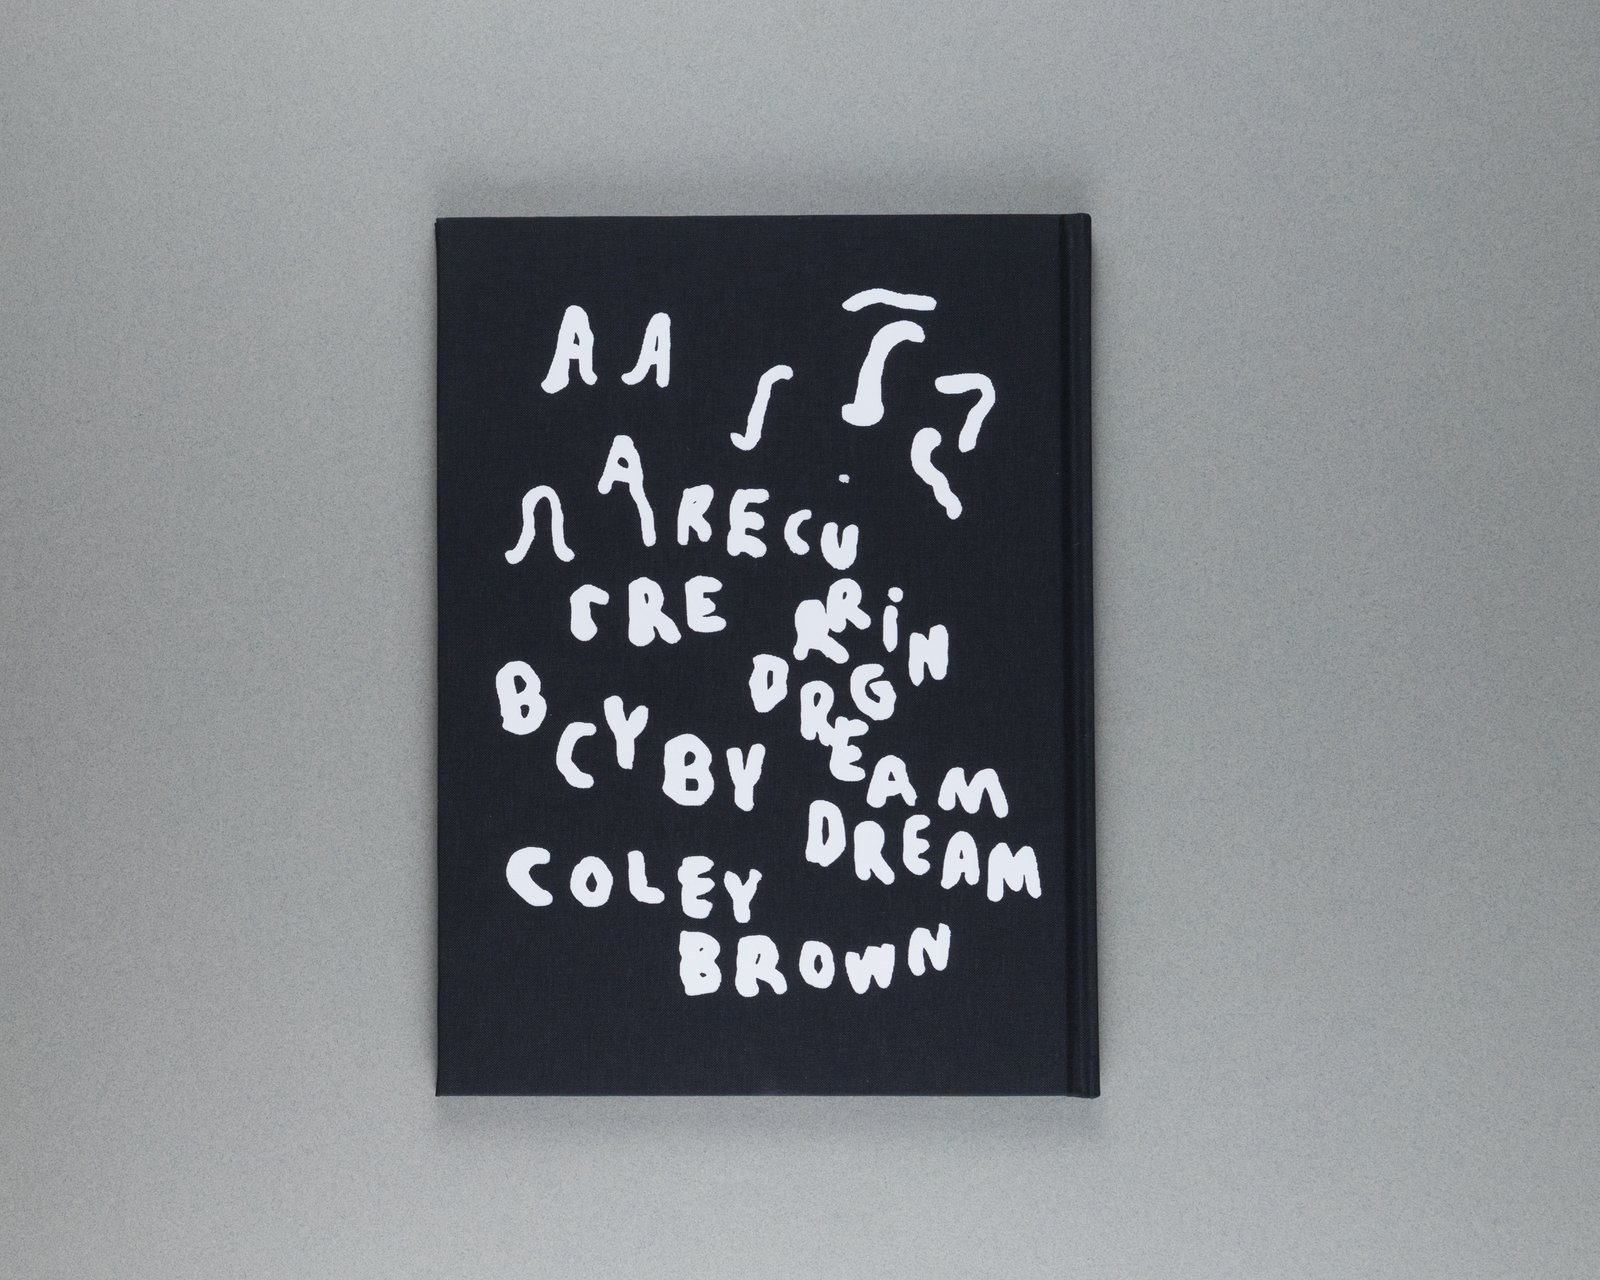 Coley Brown - A Recurring Dream | Silent Sound Books